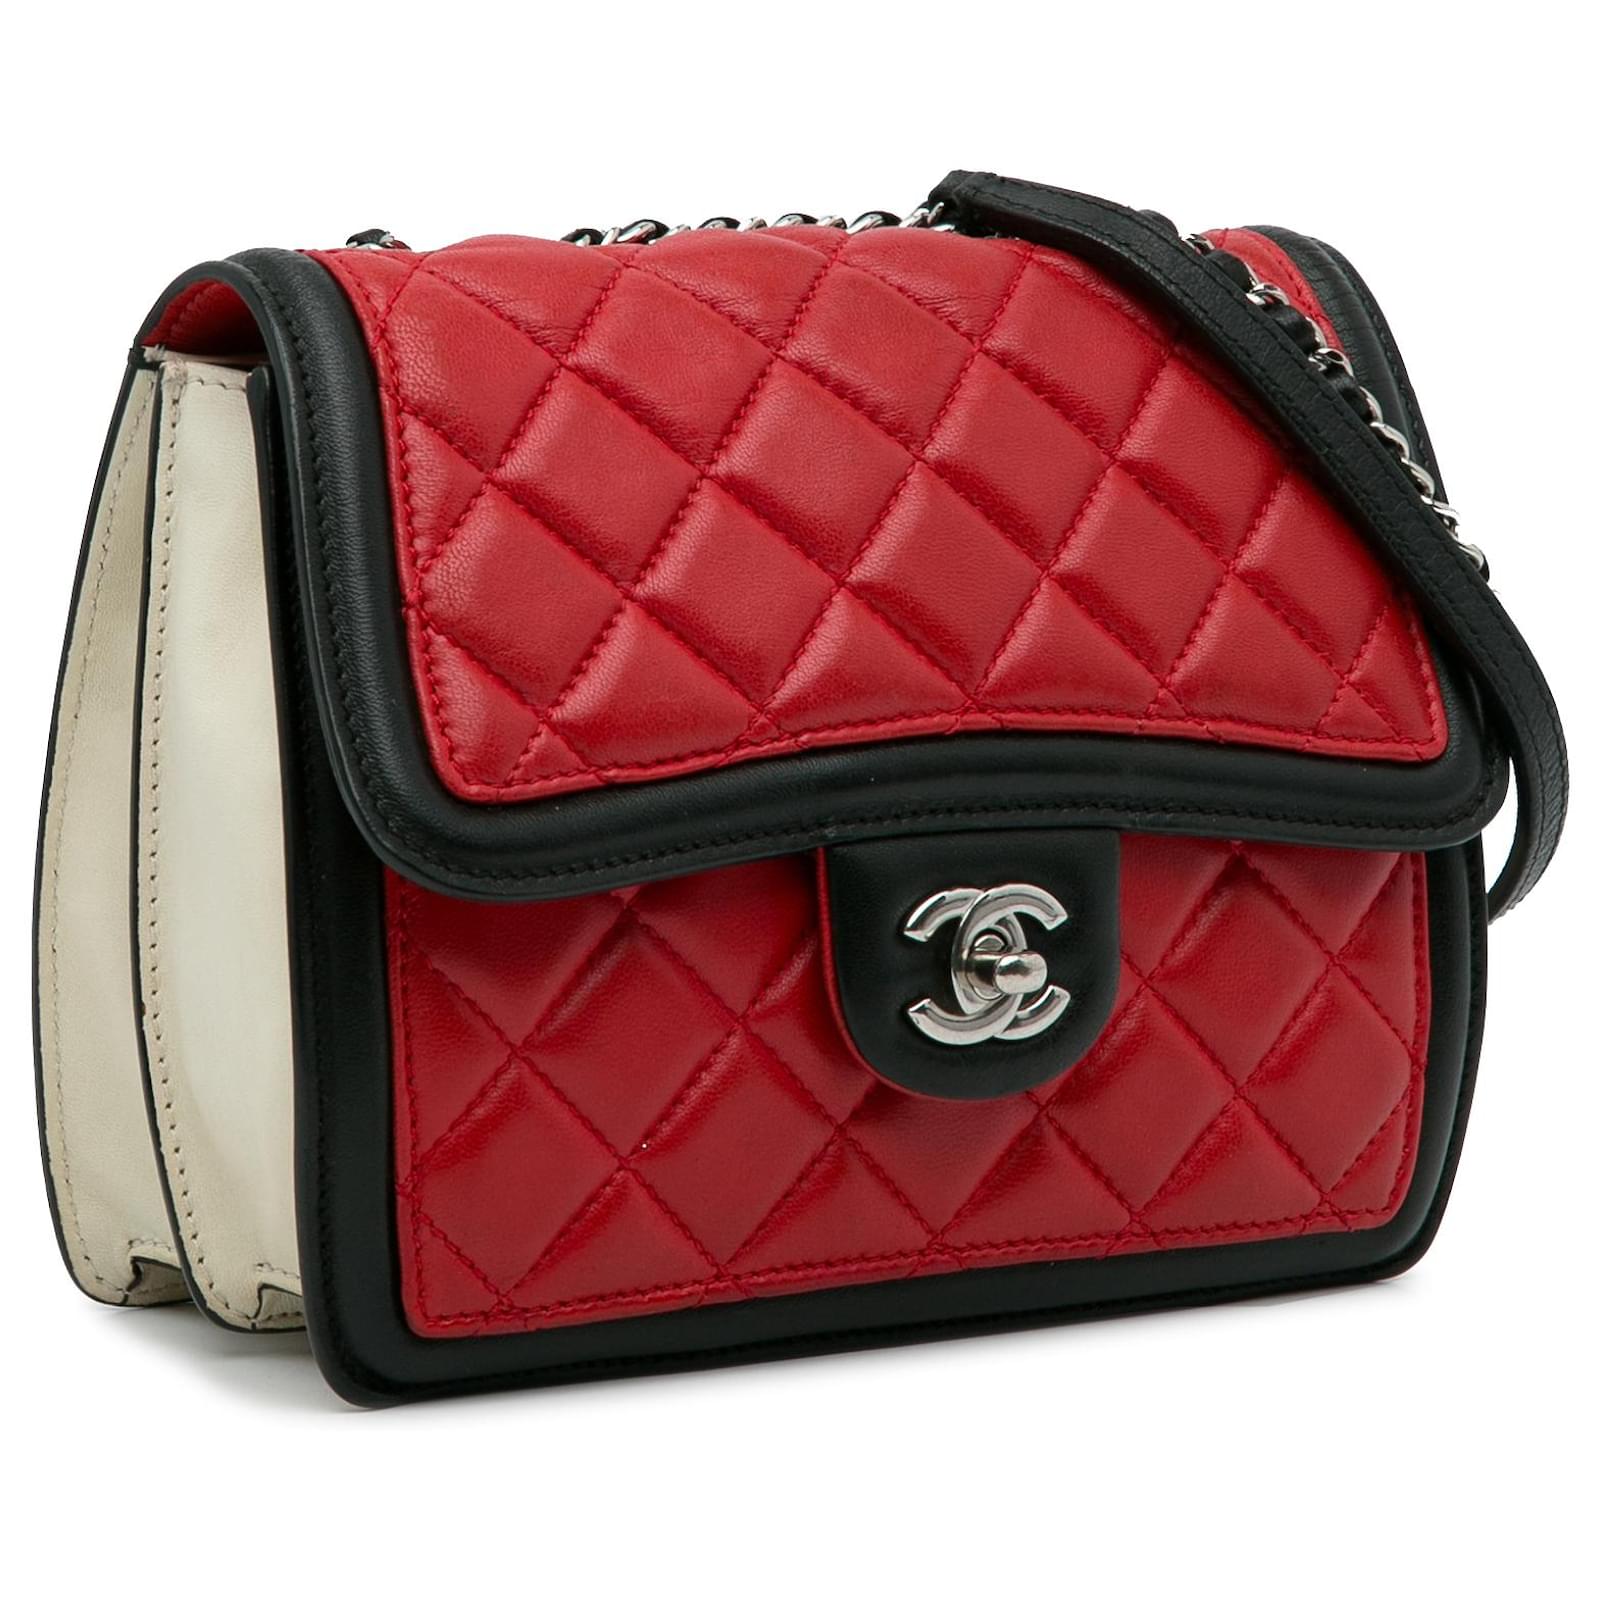 red and white chanel bag black